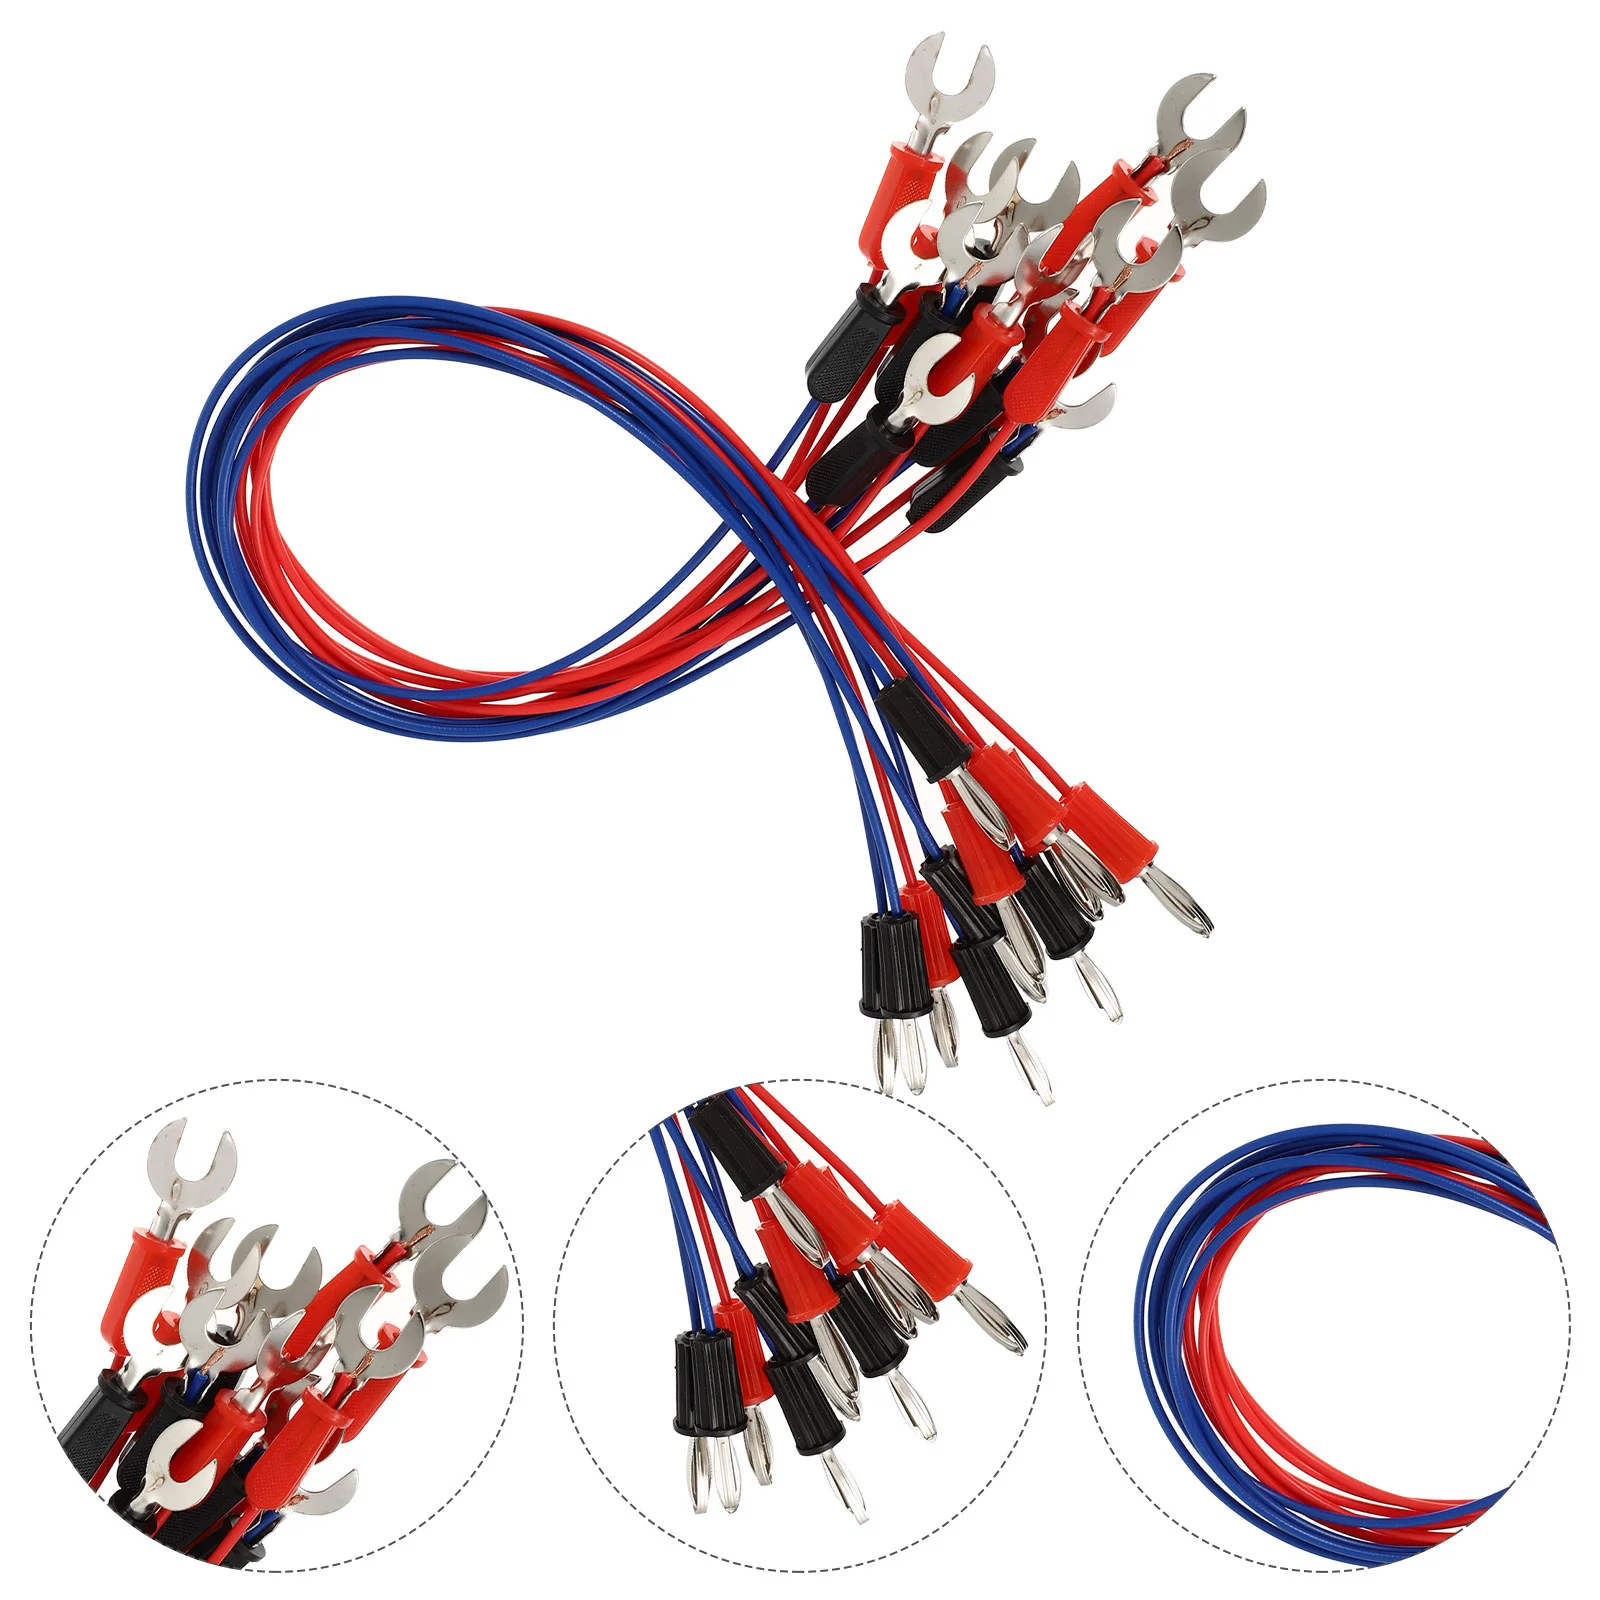 

12Pcs Interconnect Circuit Wire Copper Used for Physics Laboratory Electricity Connection, Demos Teaching Basic Principles Of